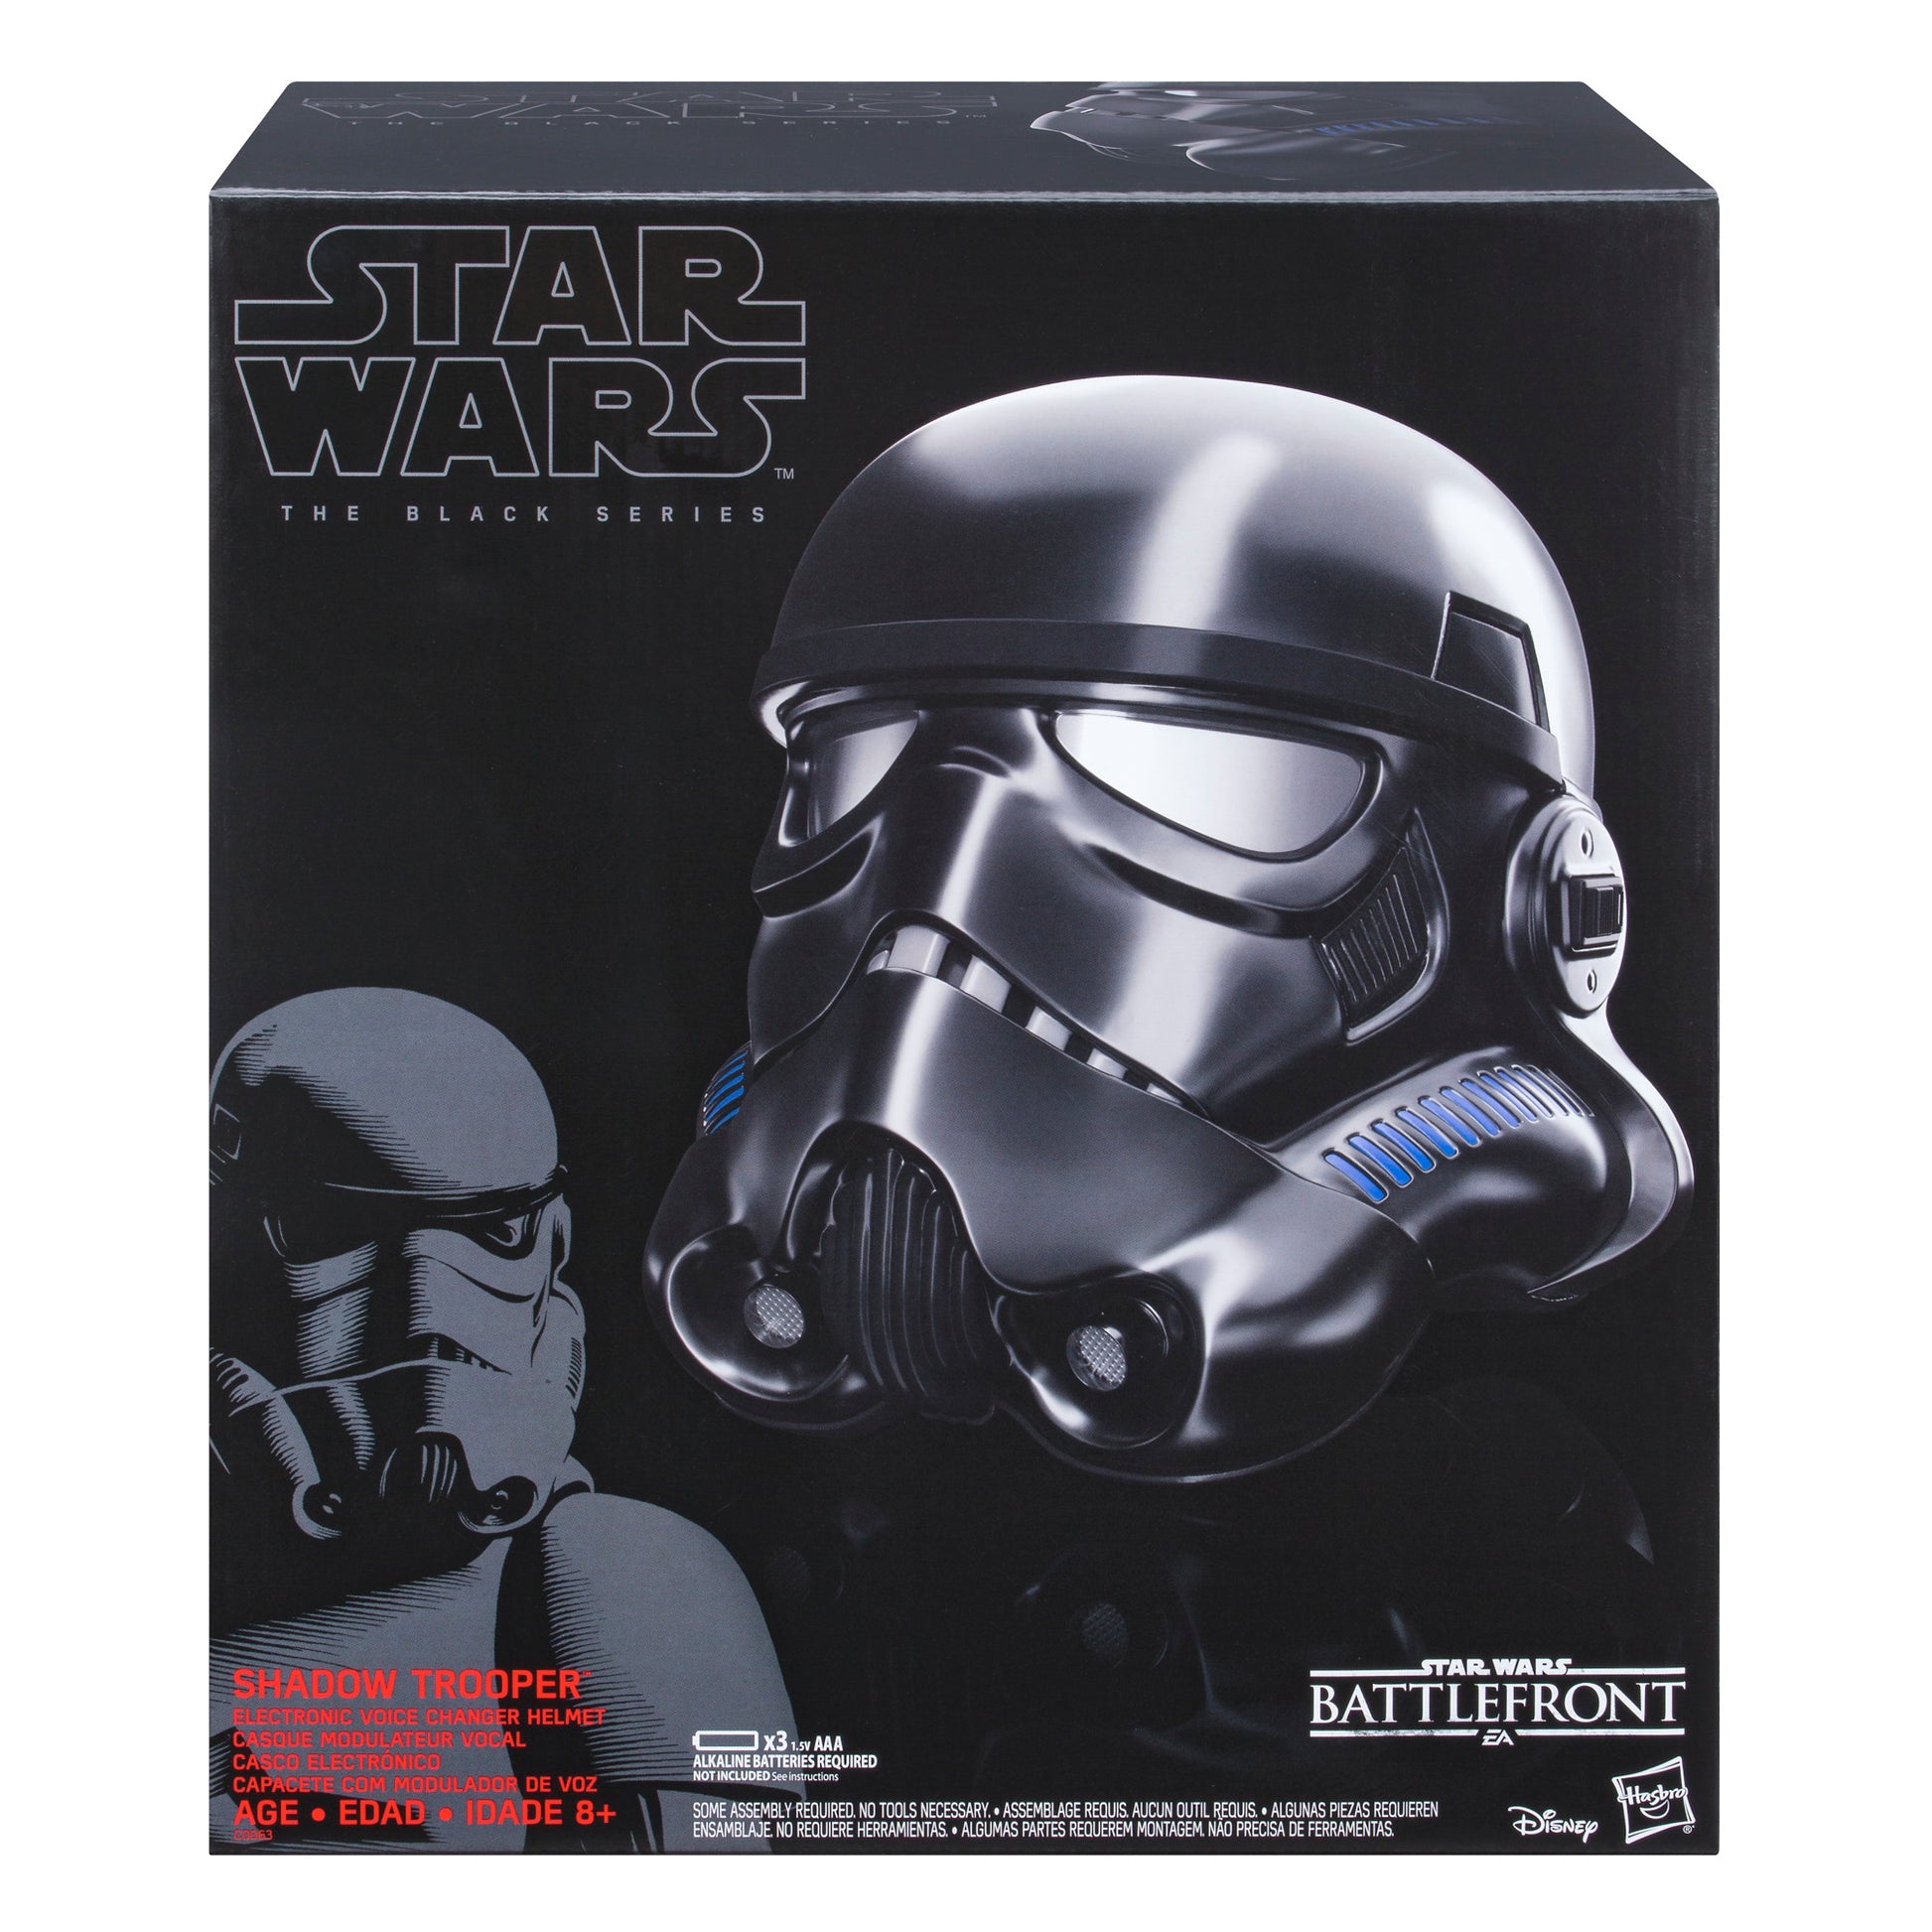 Star Wars The Black Series Shadow Trooper Electronic Voice Changer Helmet in a box - heretoserveyou